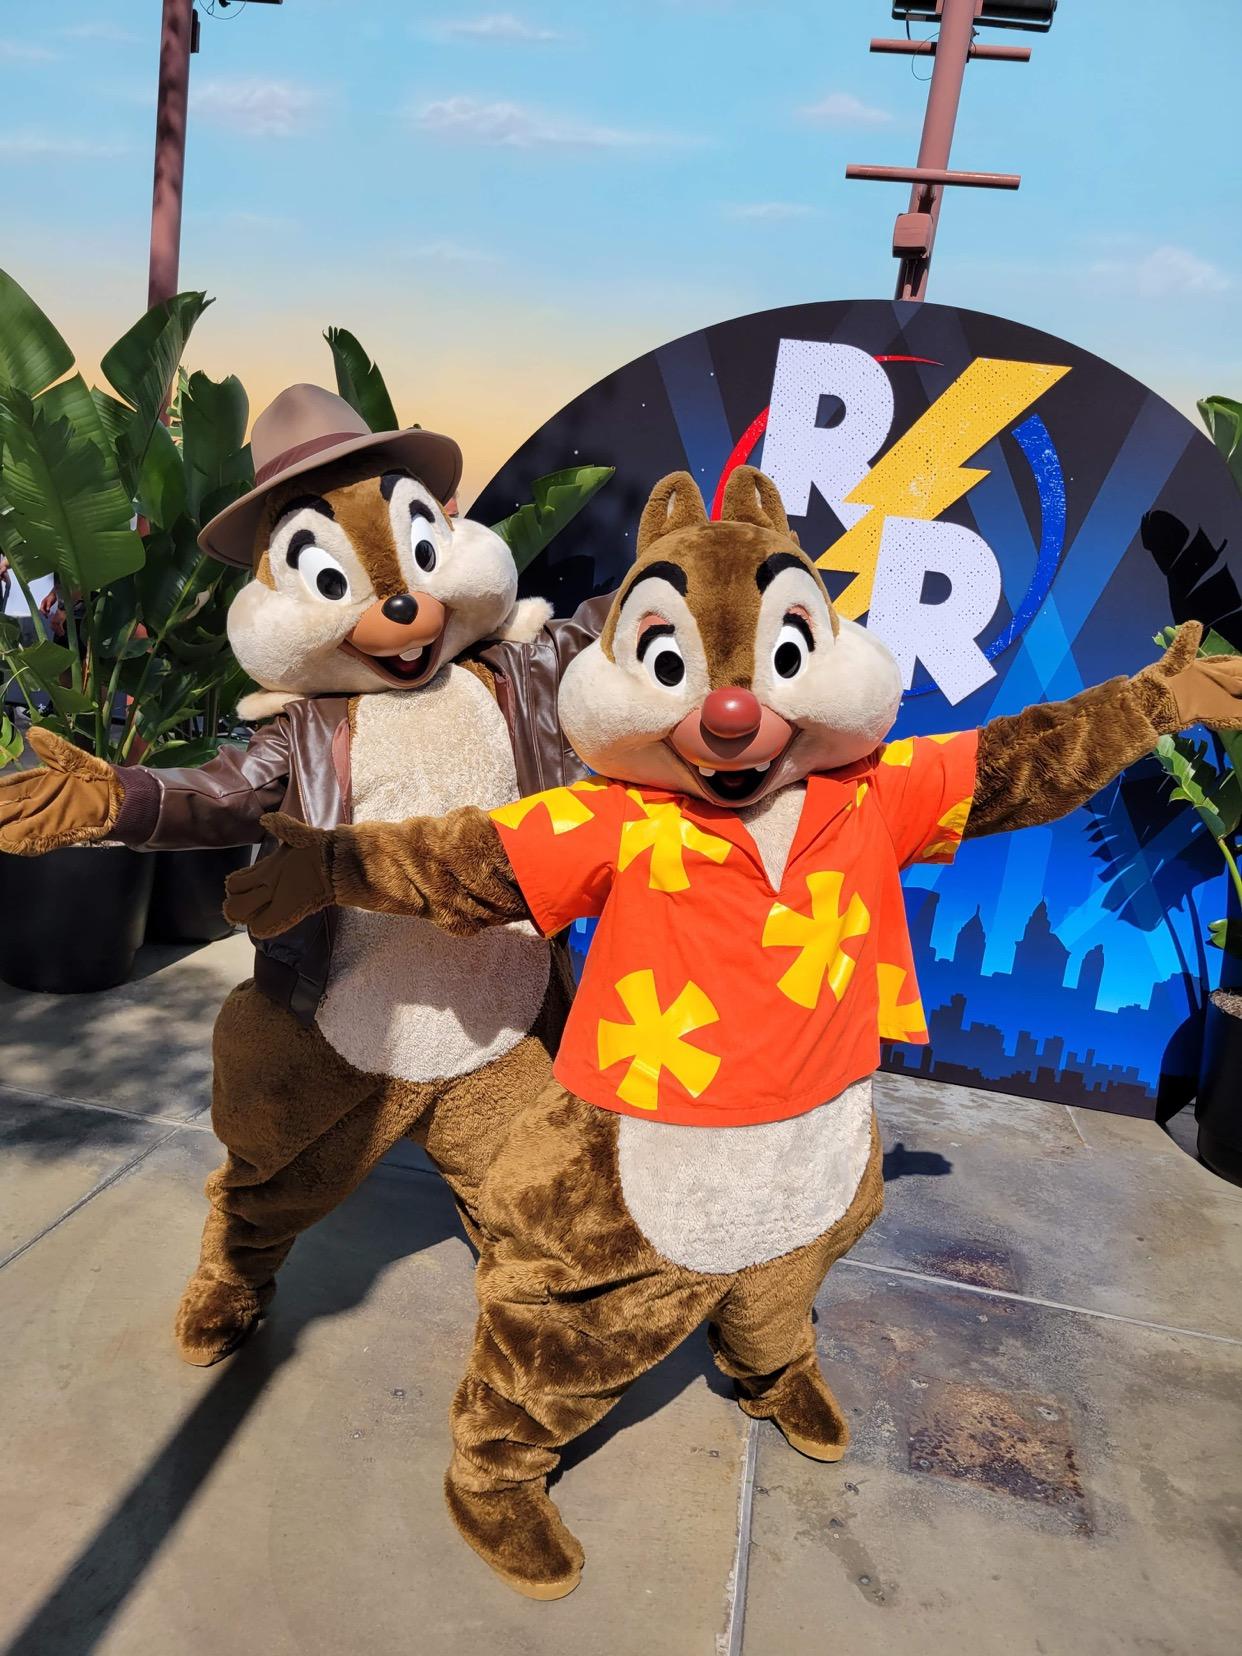 Chip 'n Dale Rescue Rangers Meet and Greet coming to Disney's